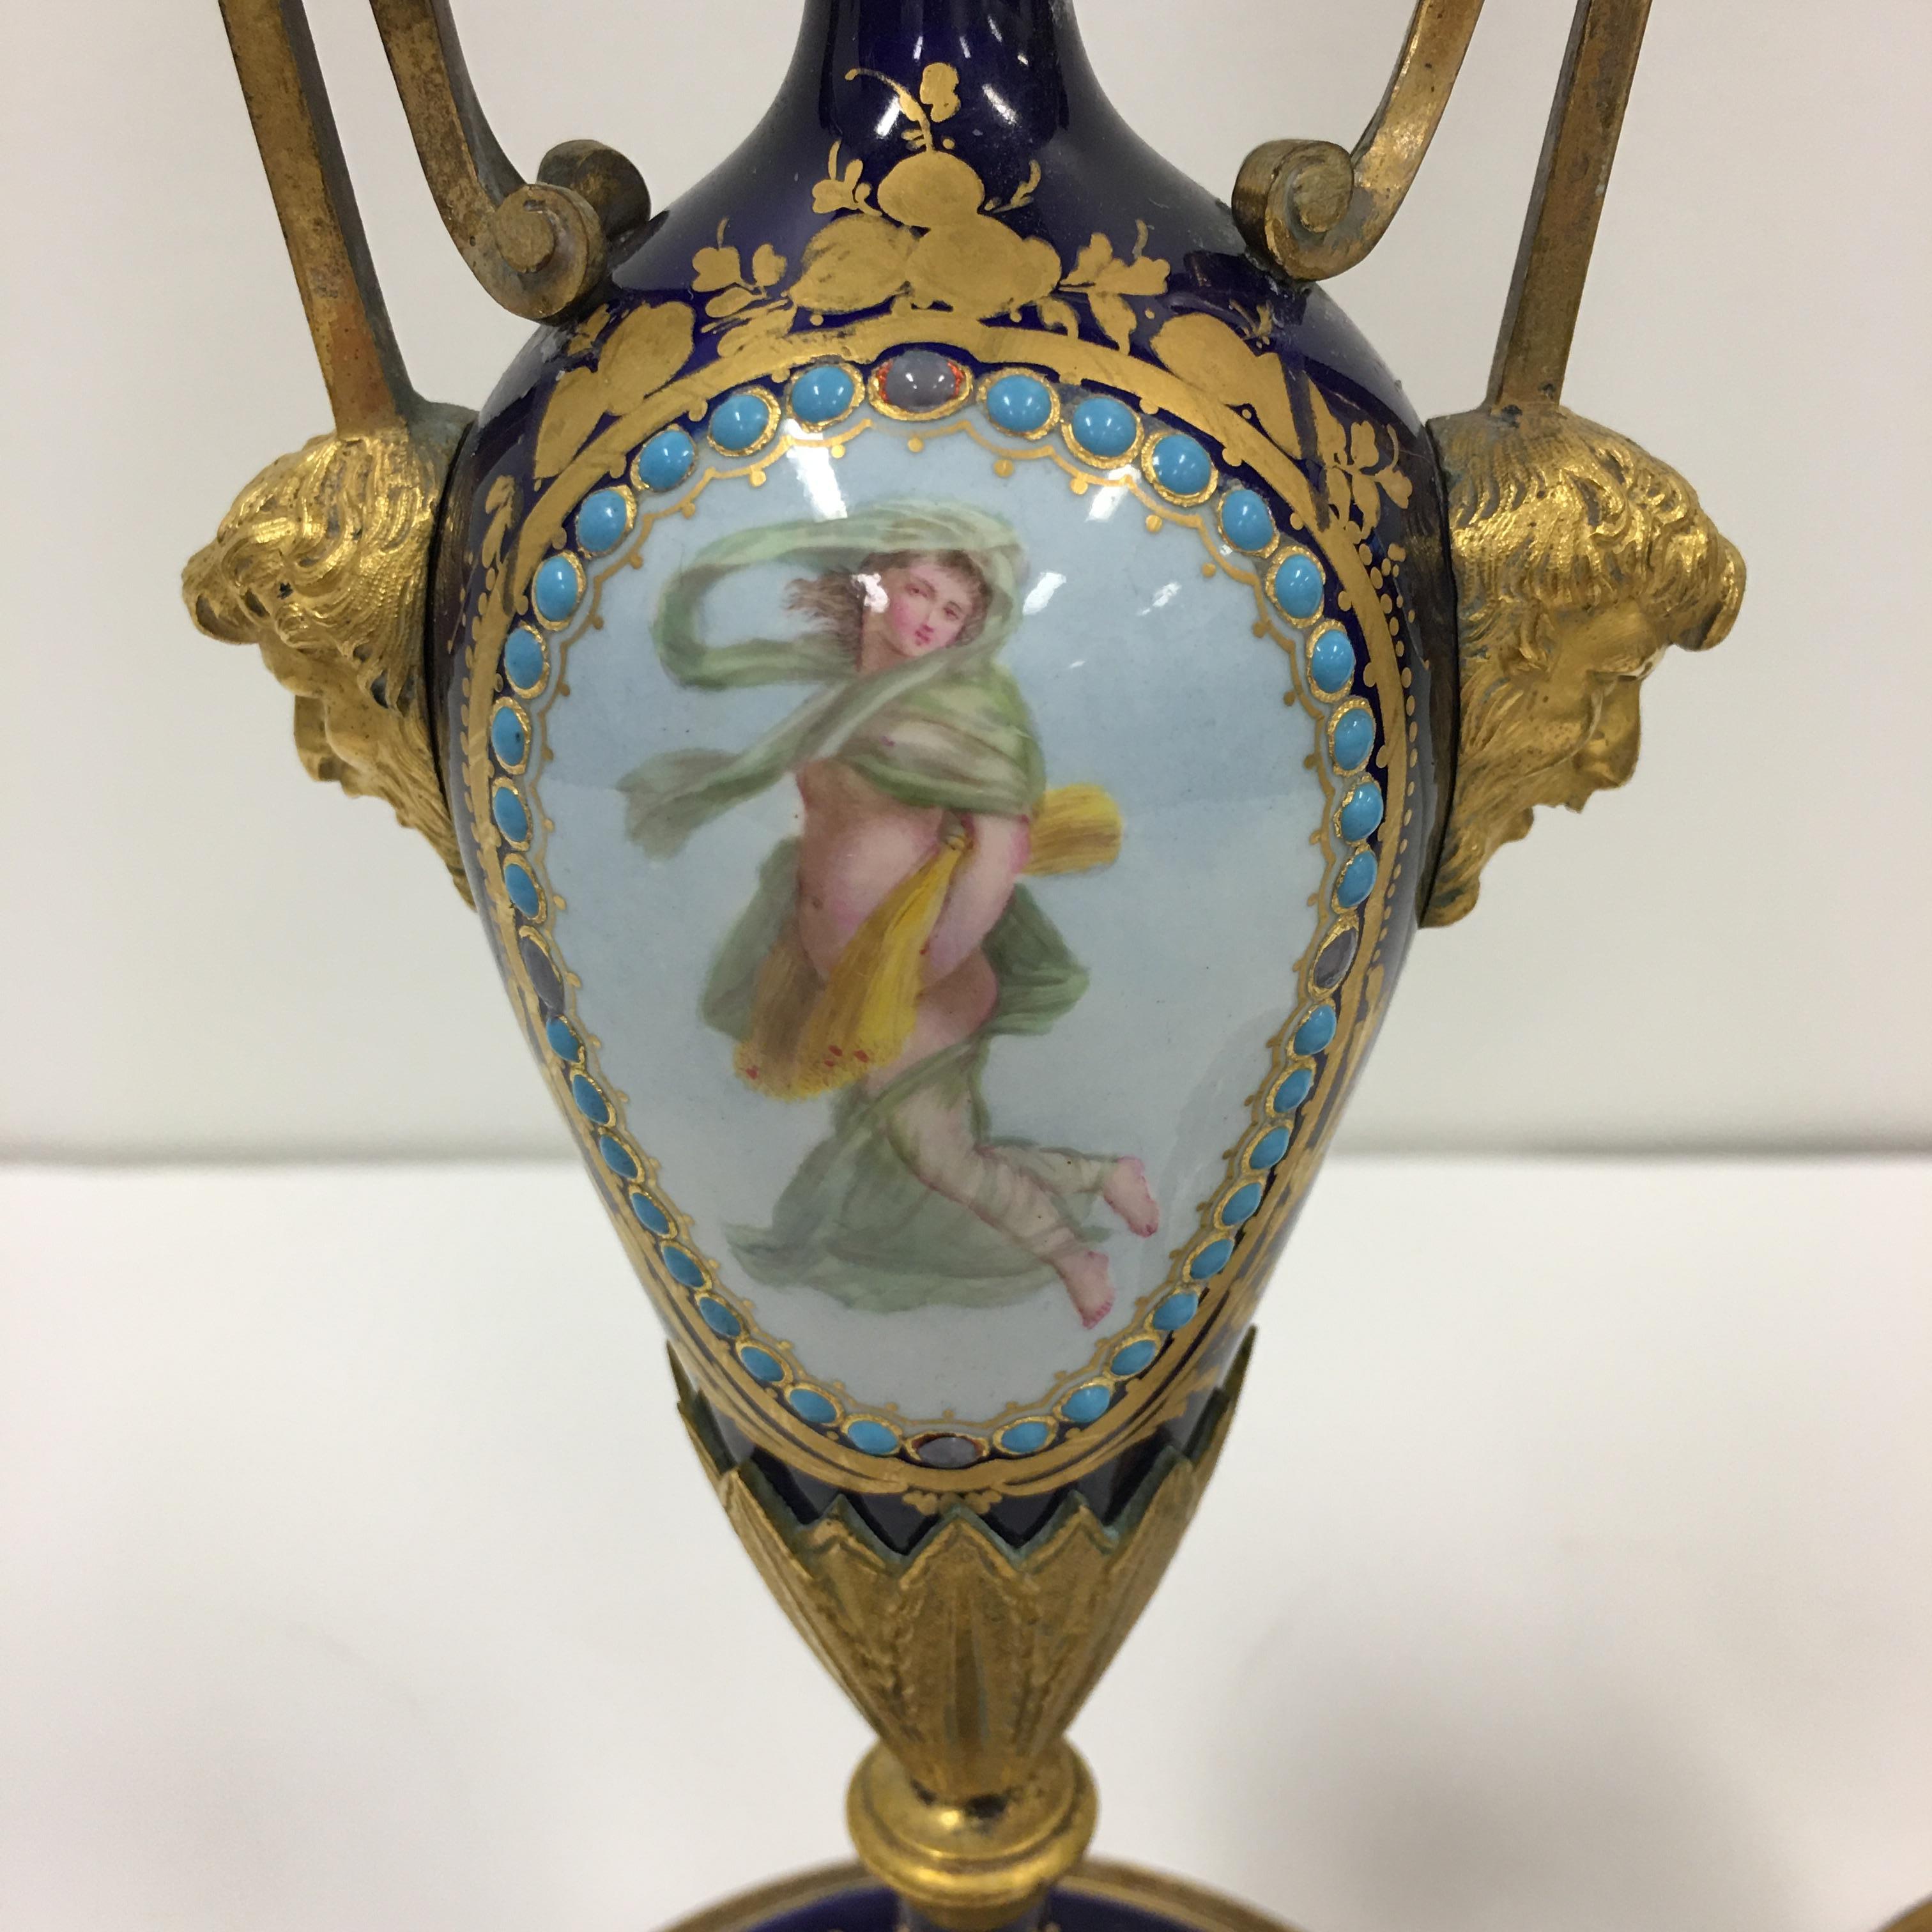 European A pair of 19th. century French Sevres porcelain and ormolu candlesticks.